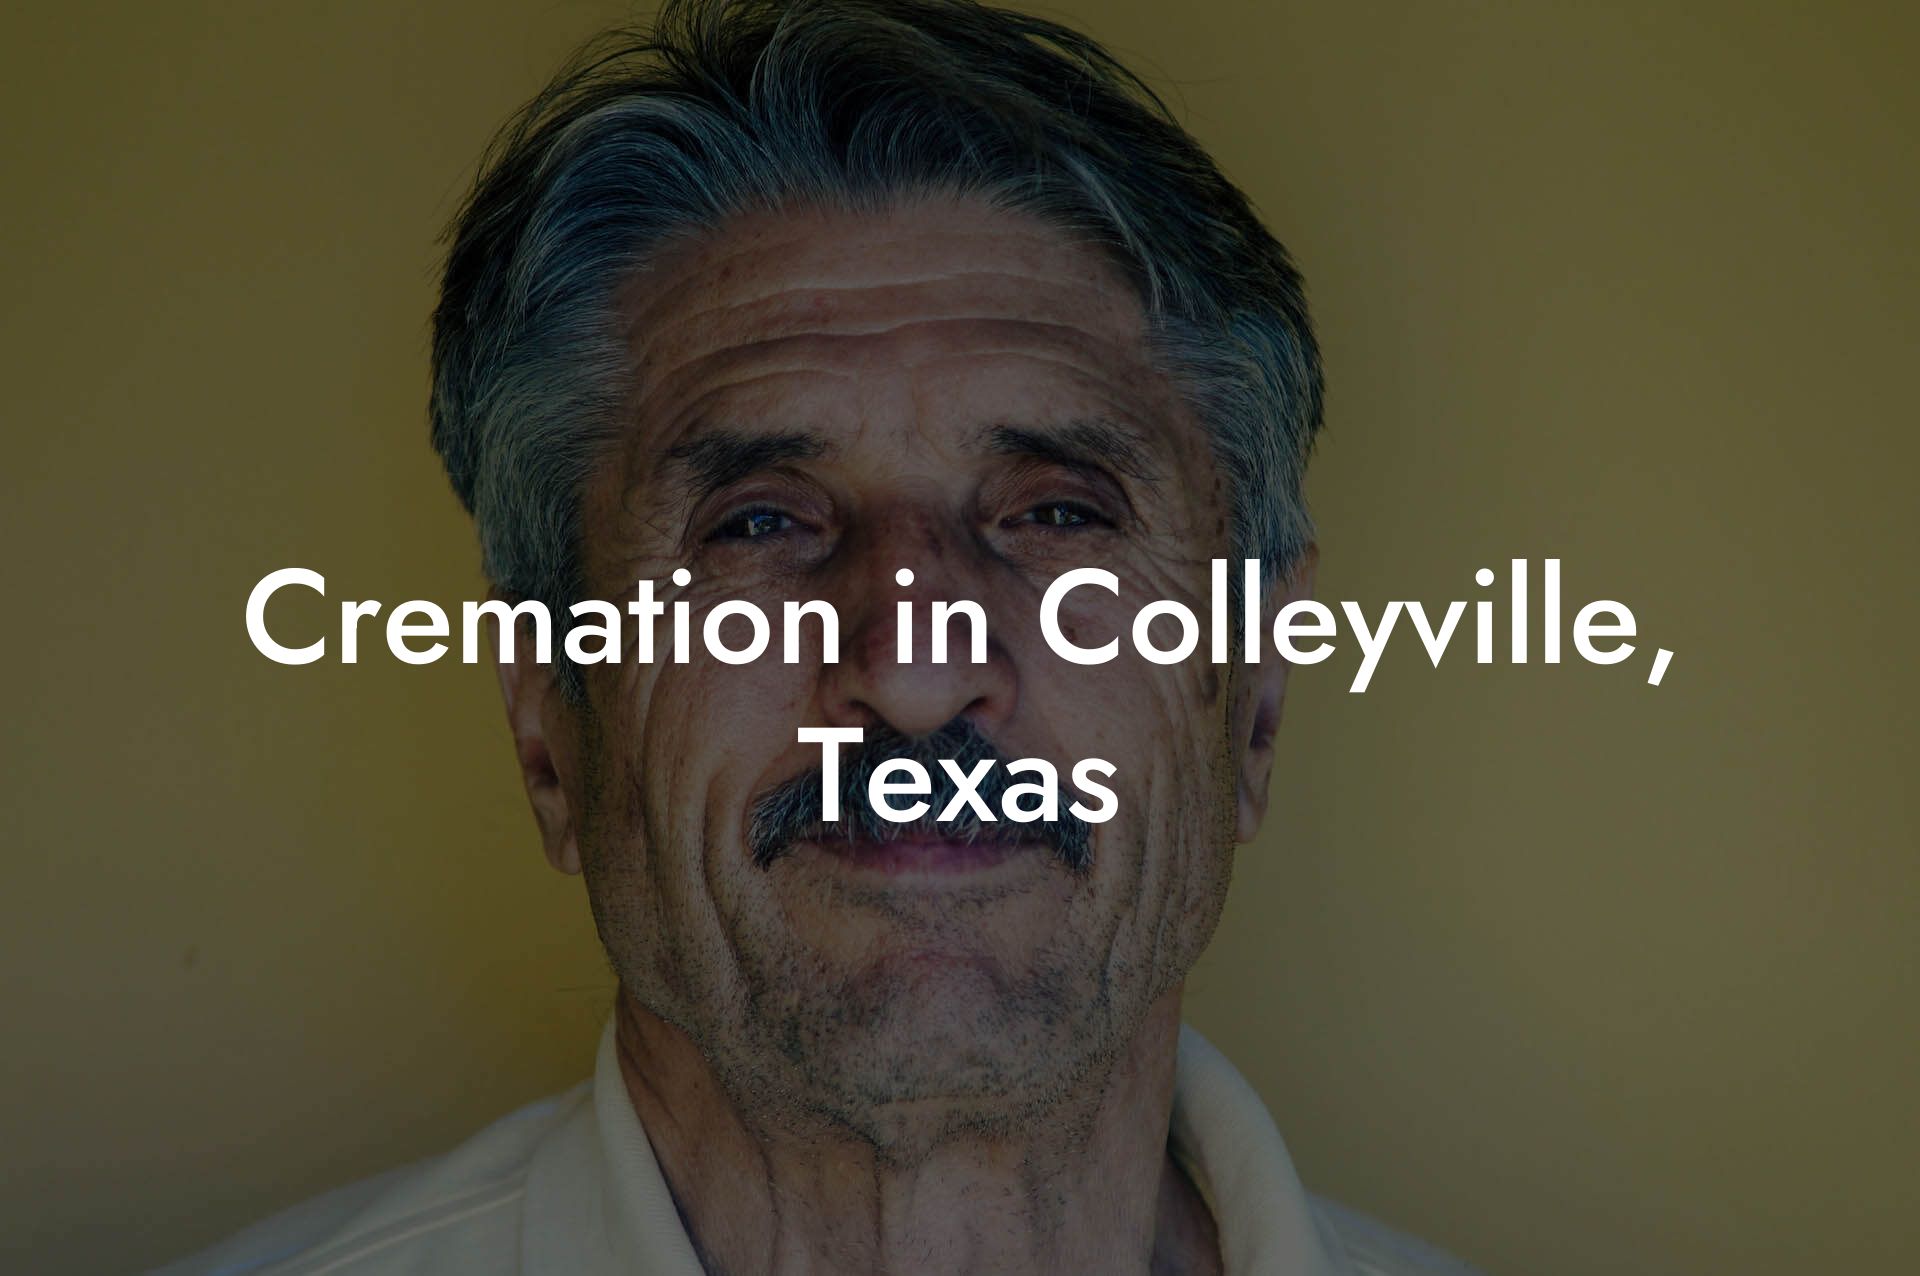 Cremation in Colleyville, Texas